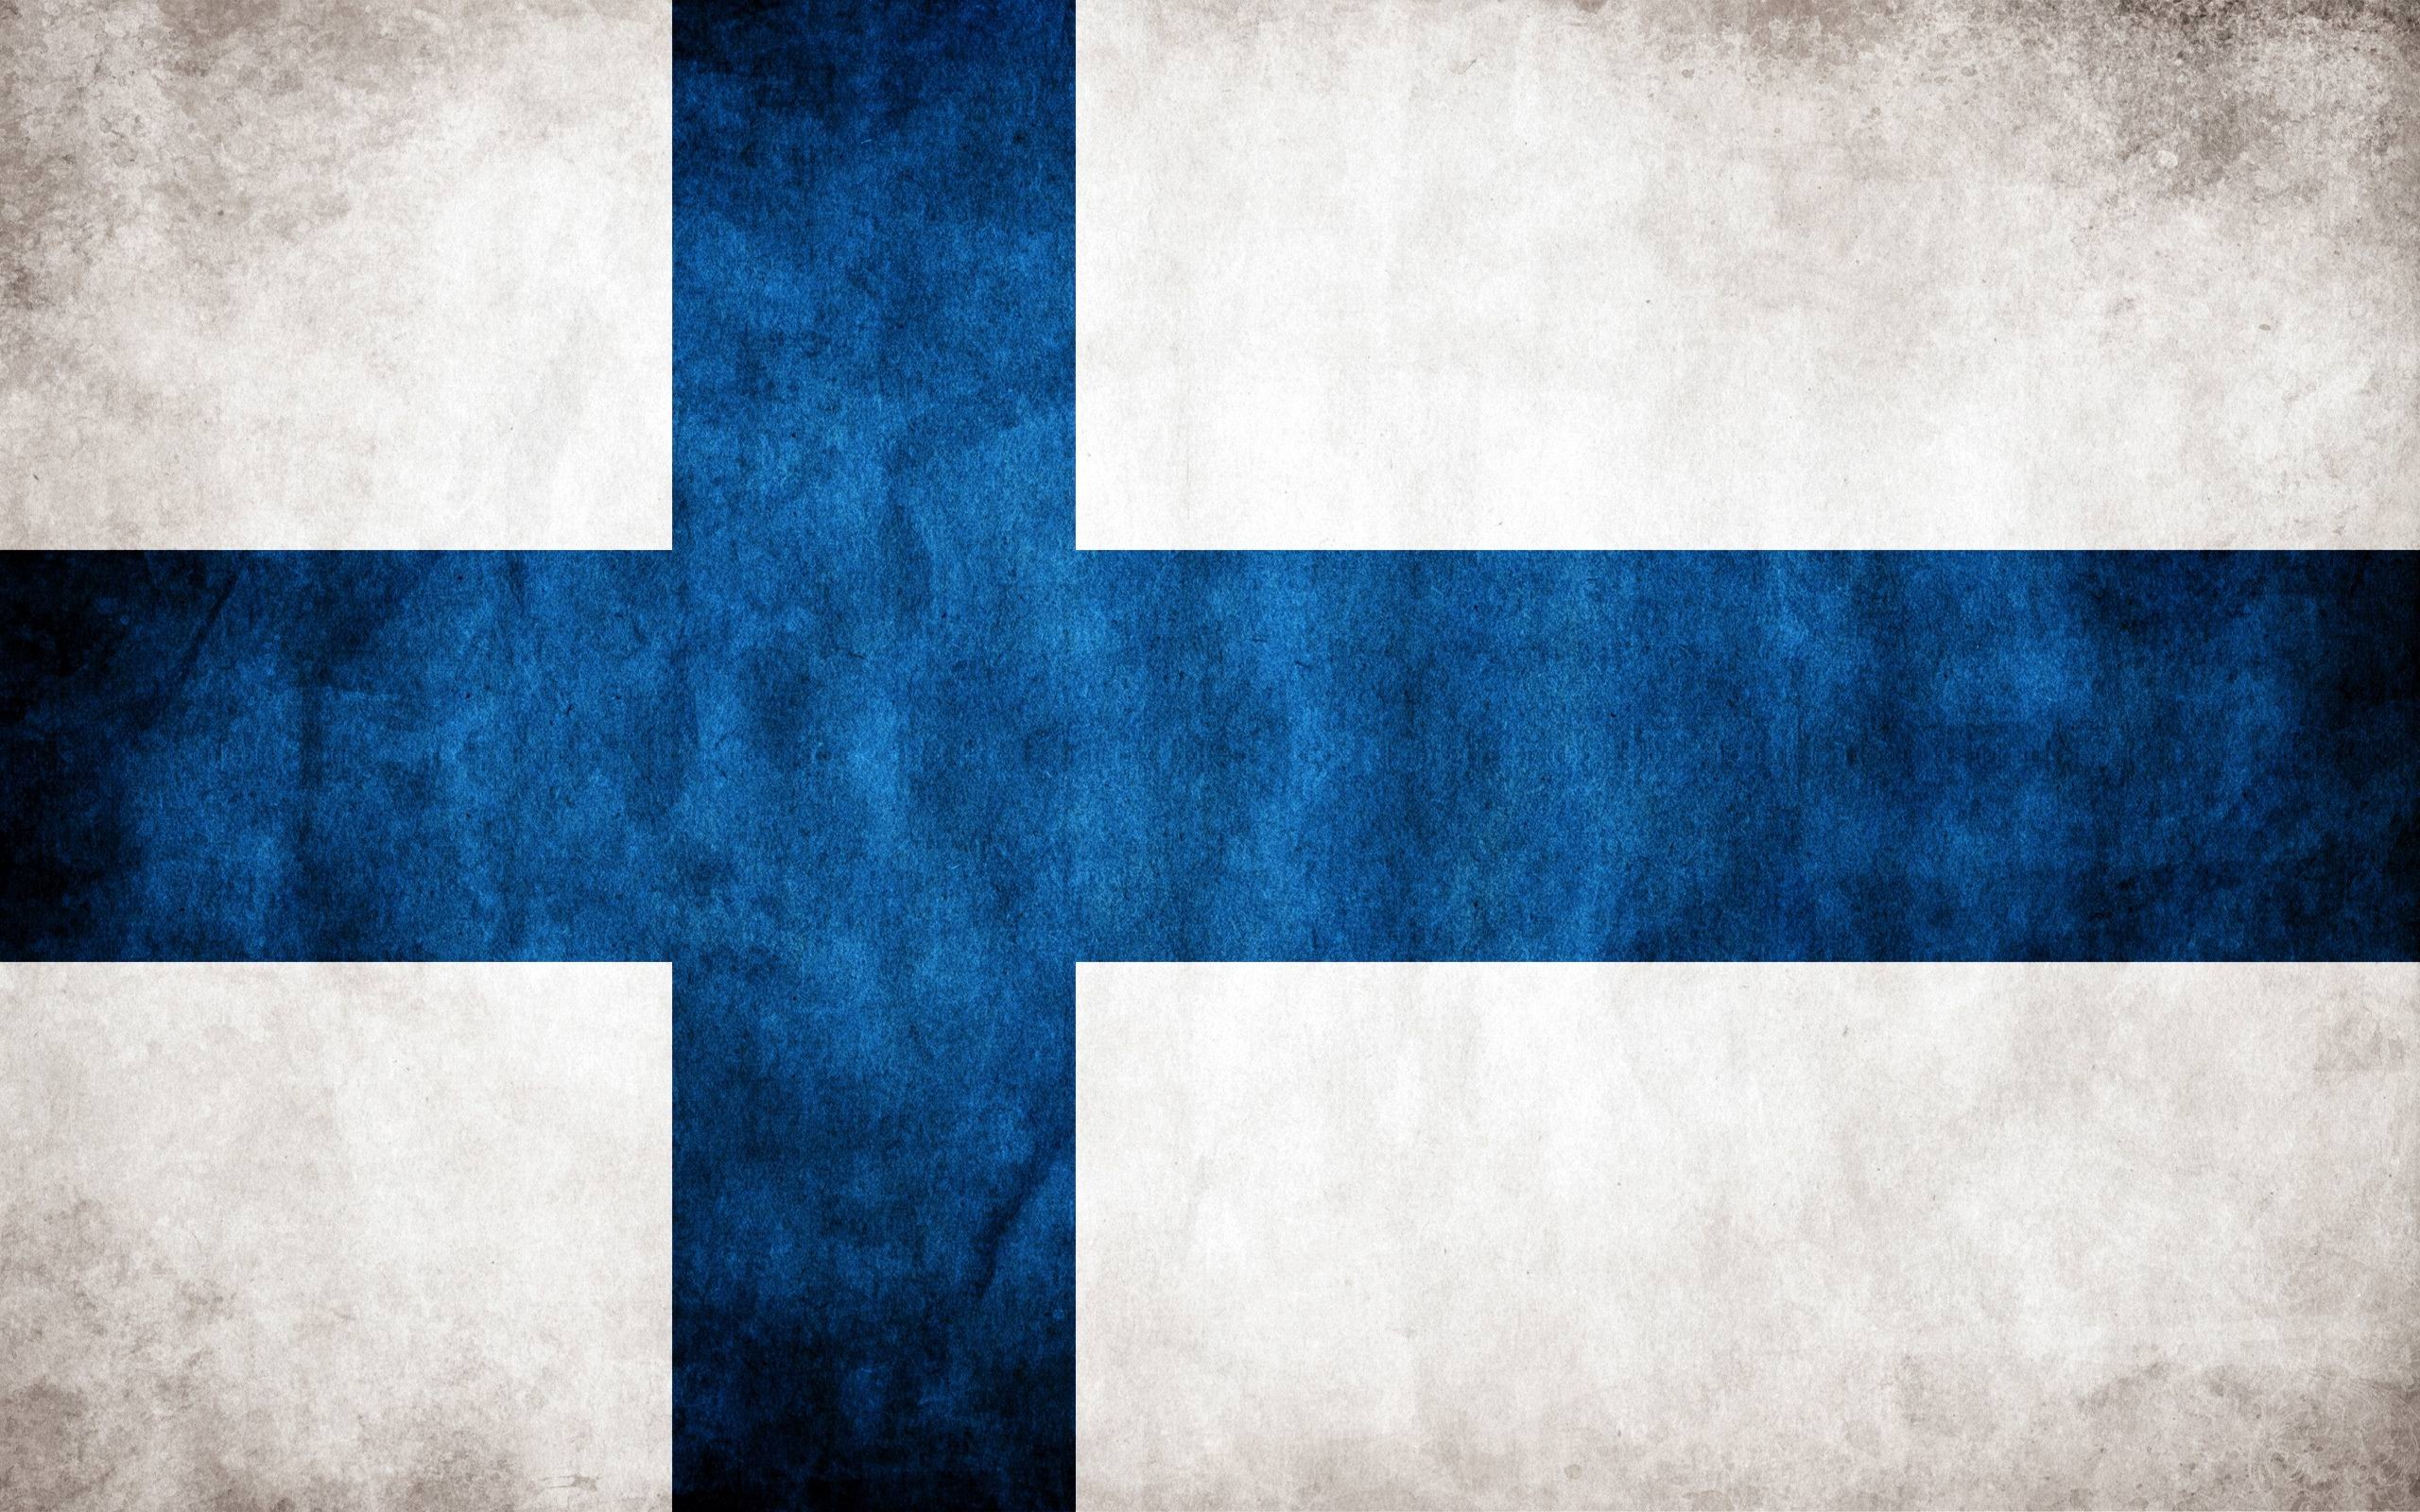 Finland: An extensive welfare state based on the Nordic model. 2560x1600 HD Wallpaper.